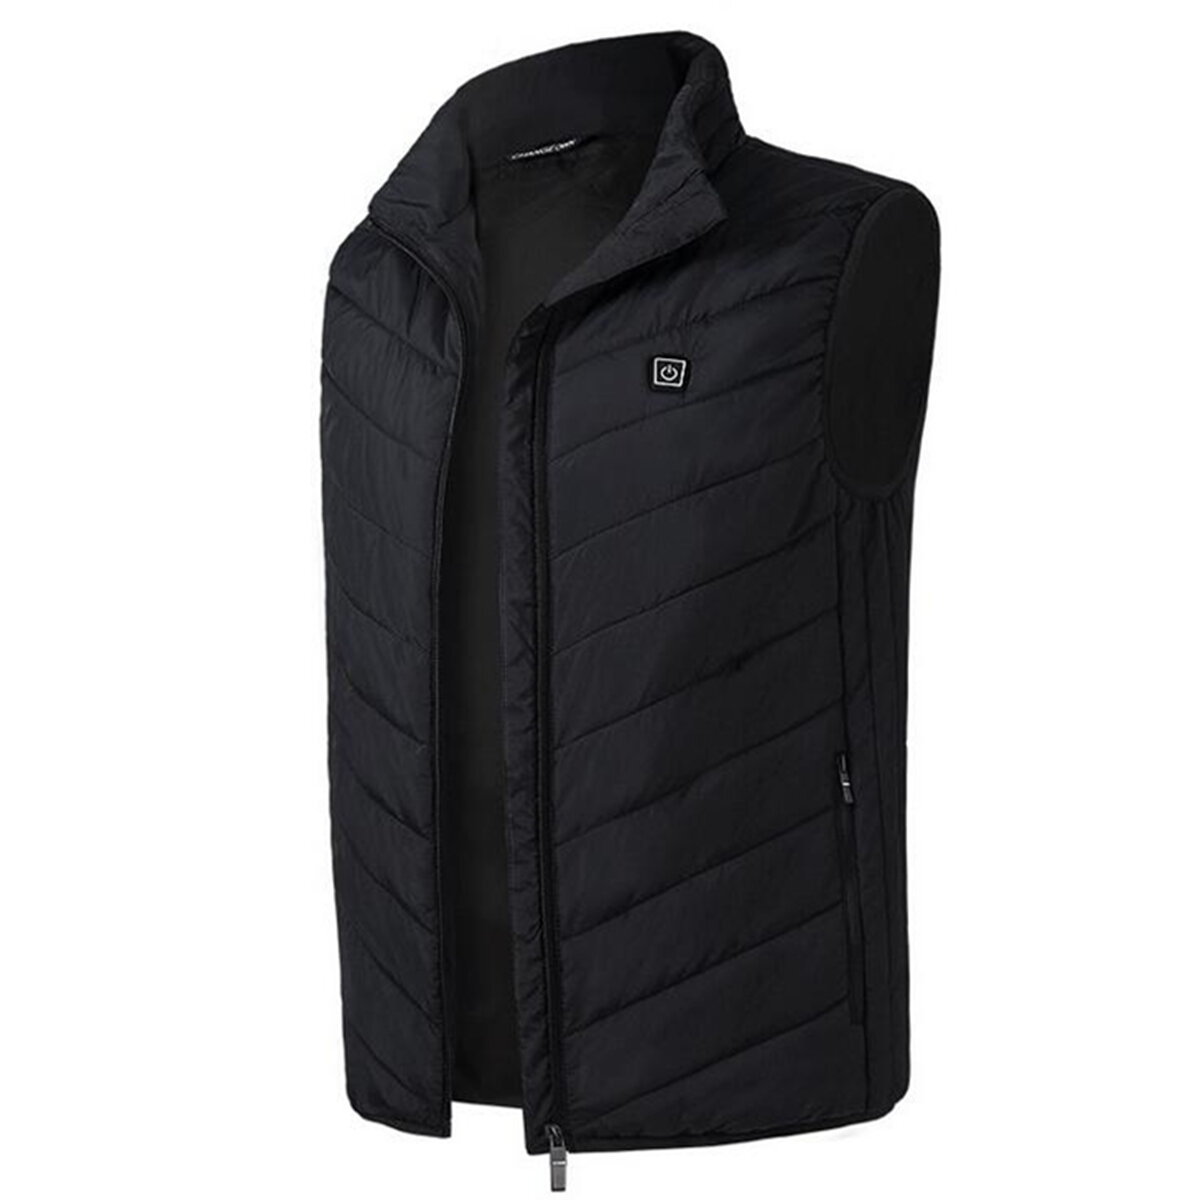 Image of Electric Heated Vest Waistcoat Cloth Jacket USB Thermal Warm Winter Body Warmer